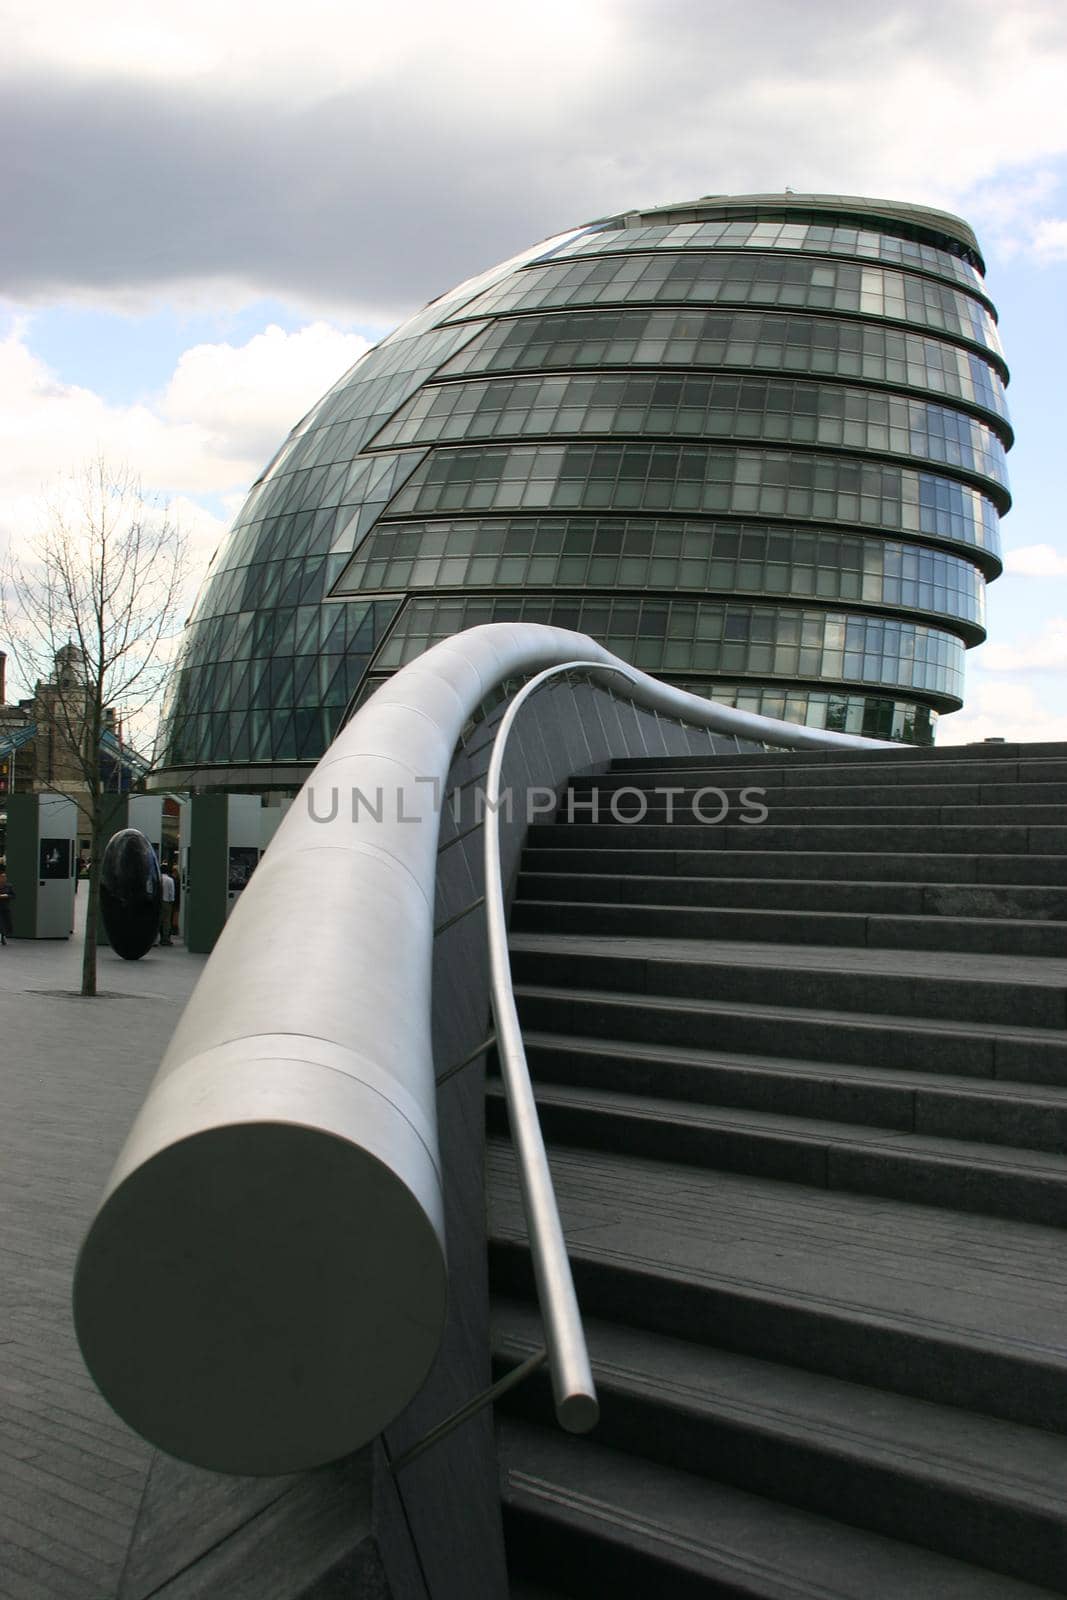 Stairs leading to the London Assembly building by VivacityImages